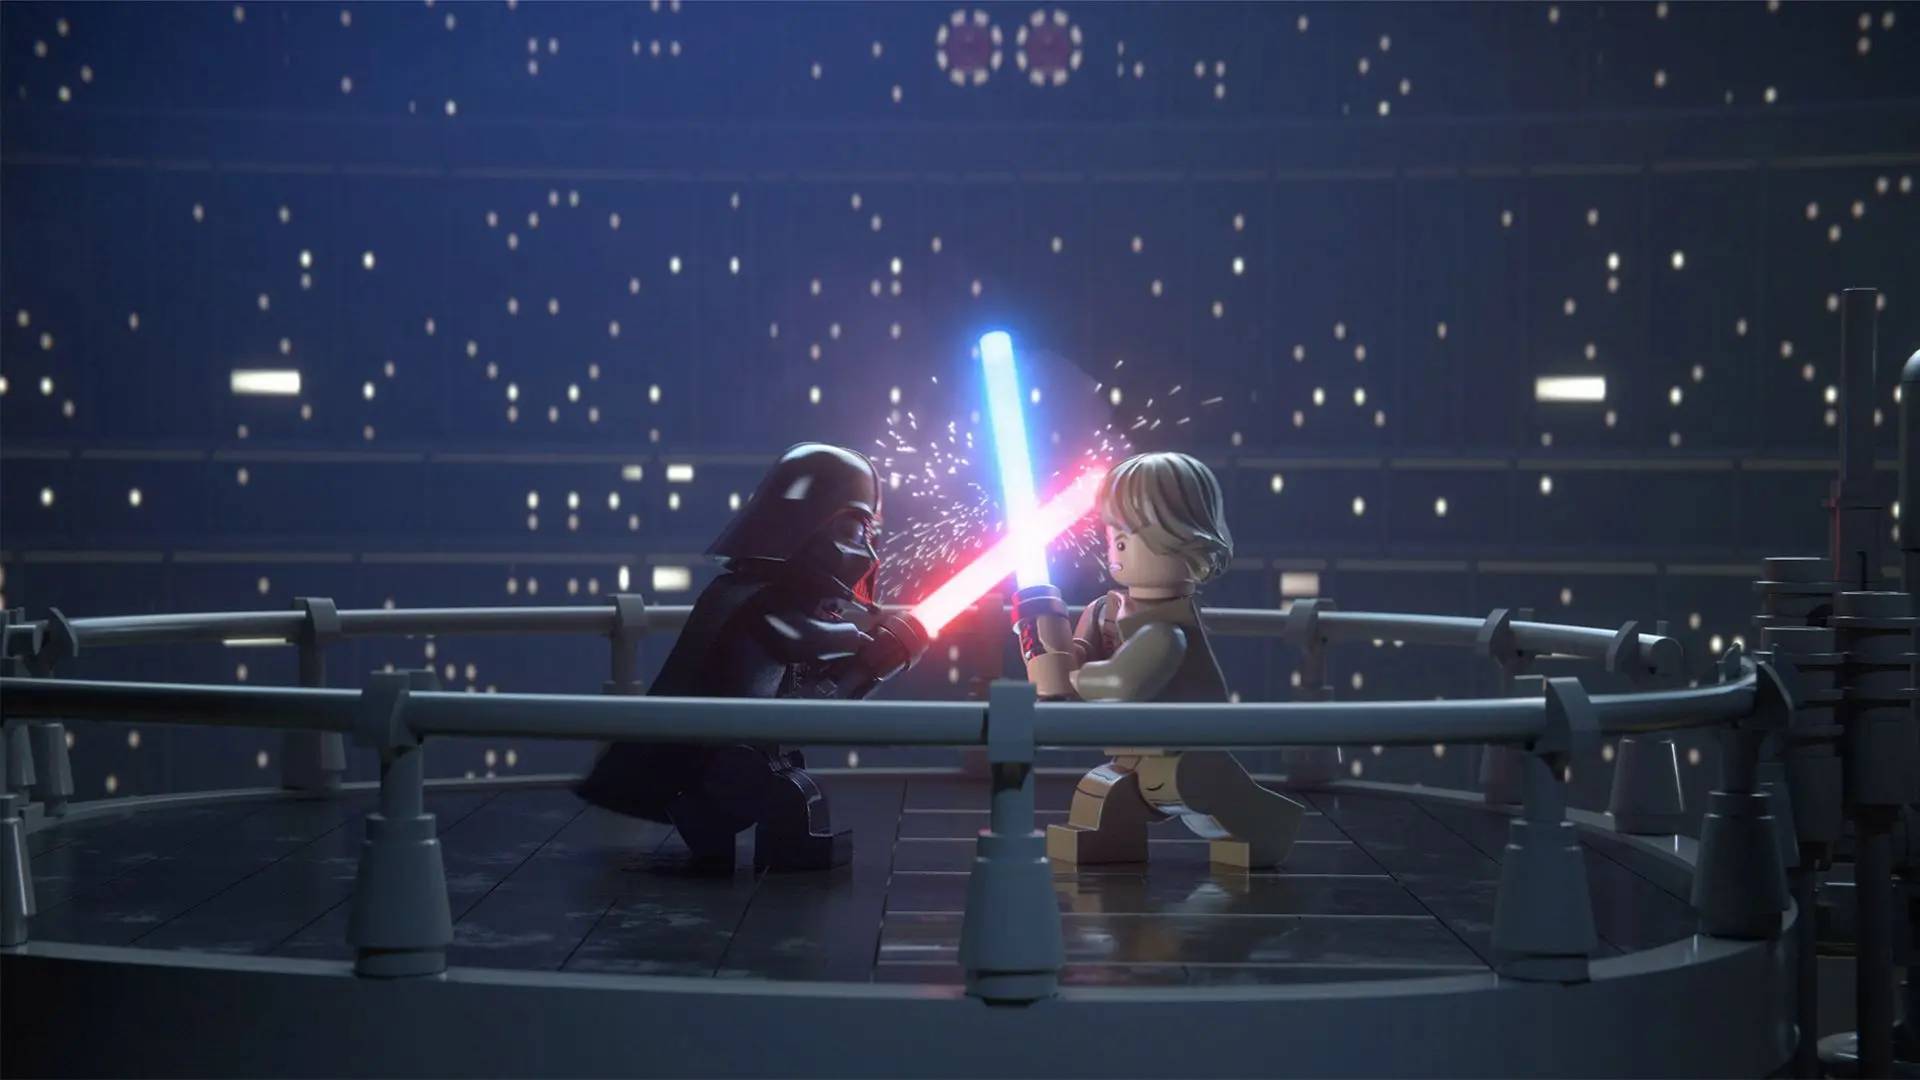 Funny games: a scene shows a Lego version of Luke and Darth Vader's liightsaber deul from The Empire Strikes Back